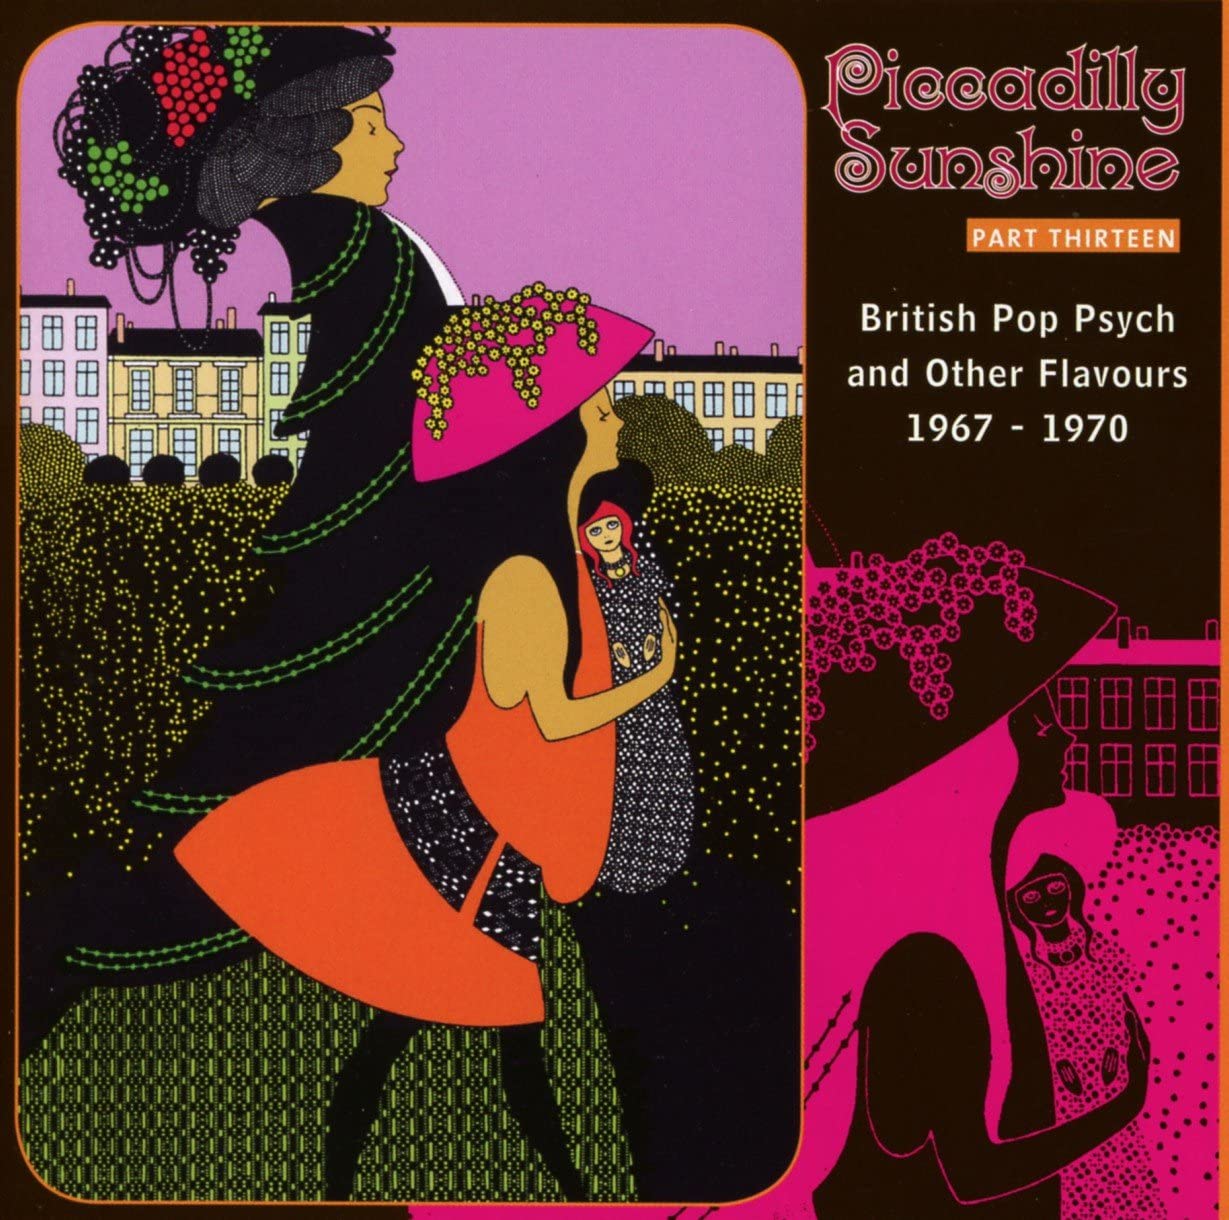 Piccadilly Sunshine Part Thirteen: British Pop Psych And Other Flavors 1967-1970 - CD